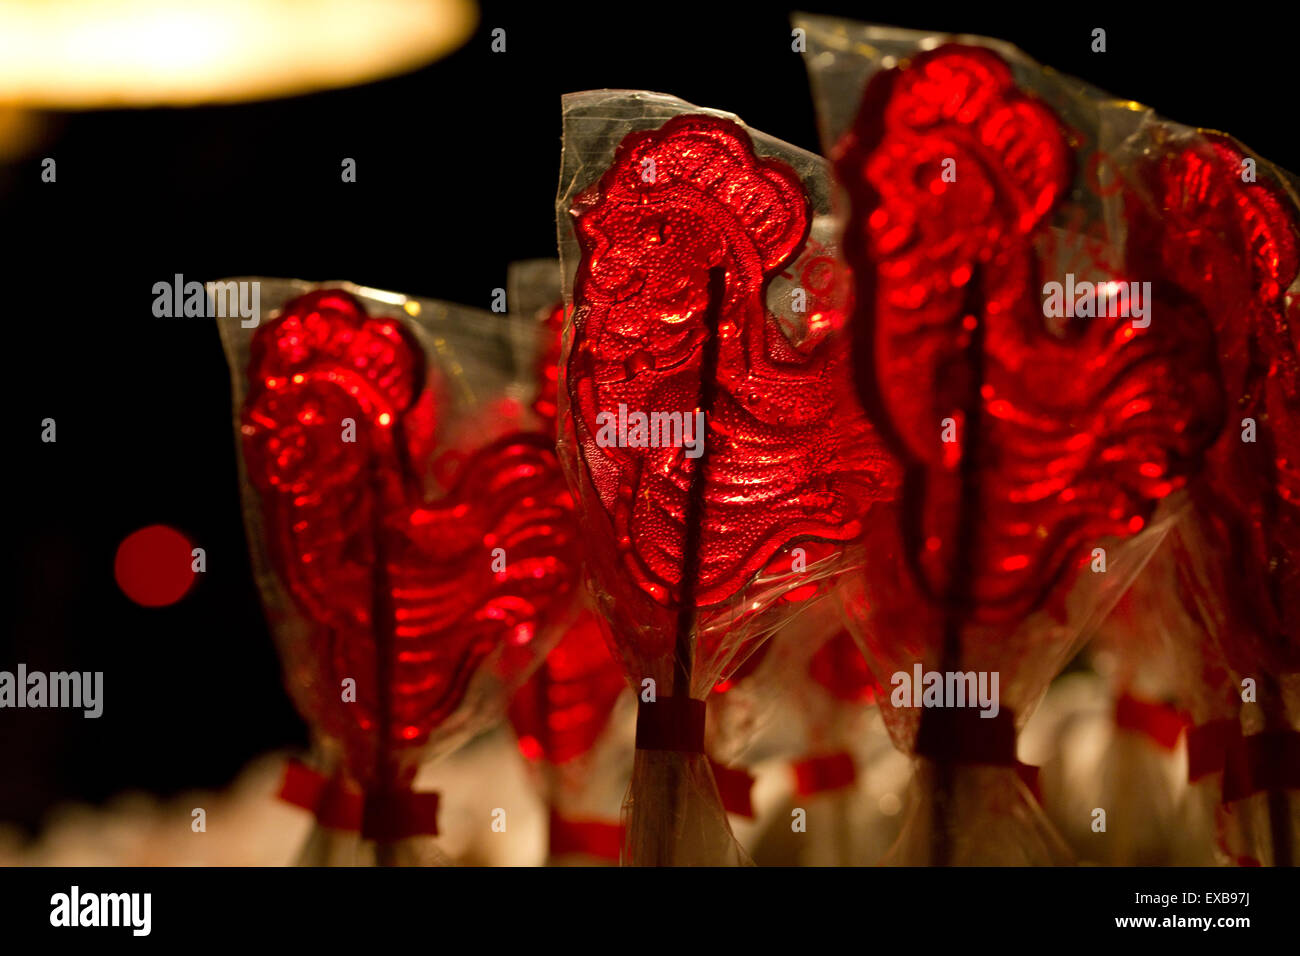 Backlit red rooster lollipops on a chapman's selling stand in central athens during the Greek antiausterity  protests. Stock Photo